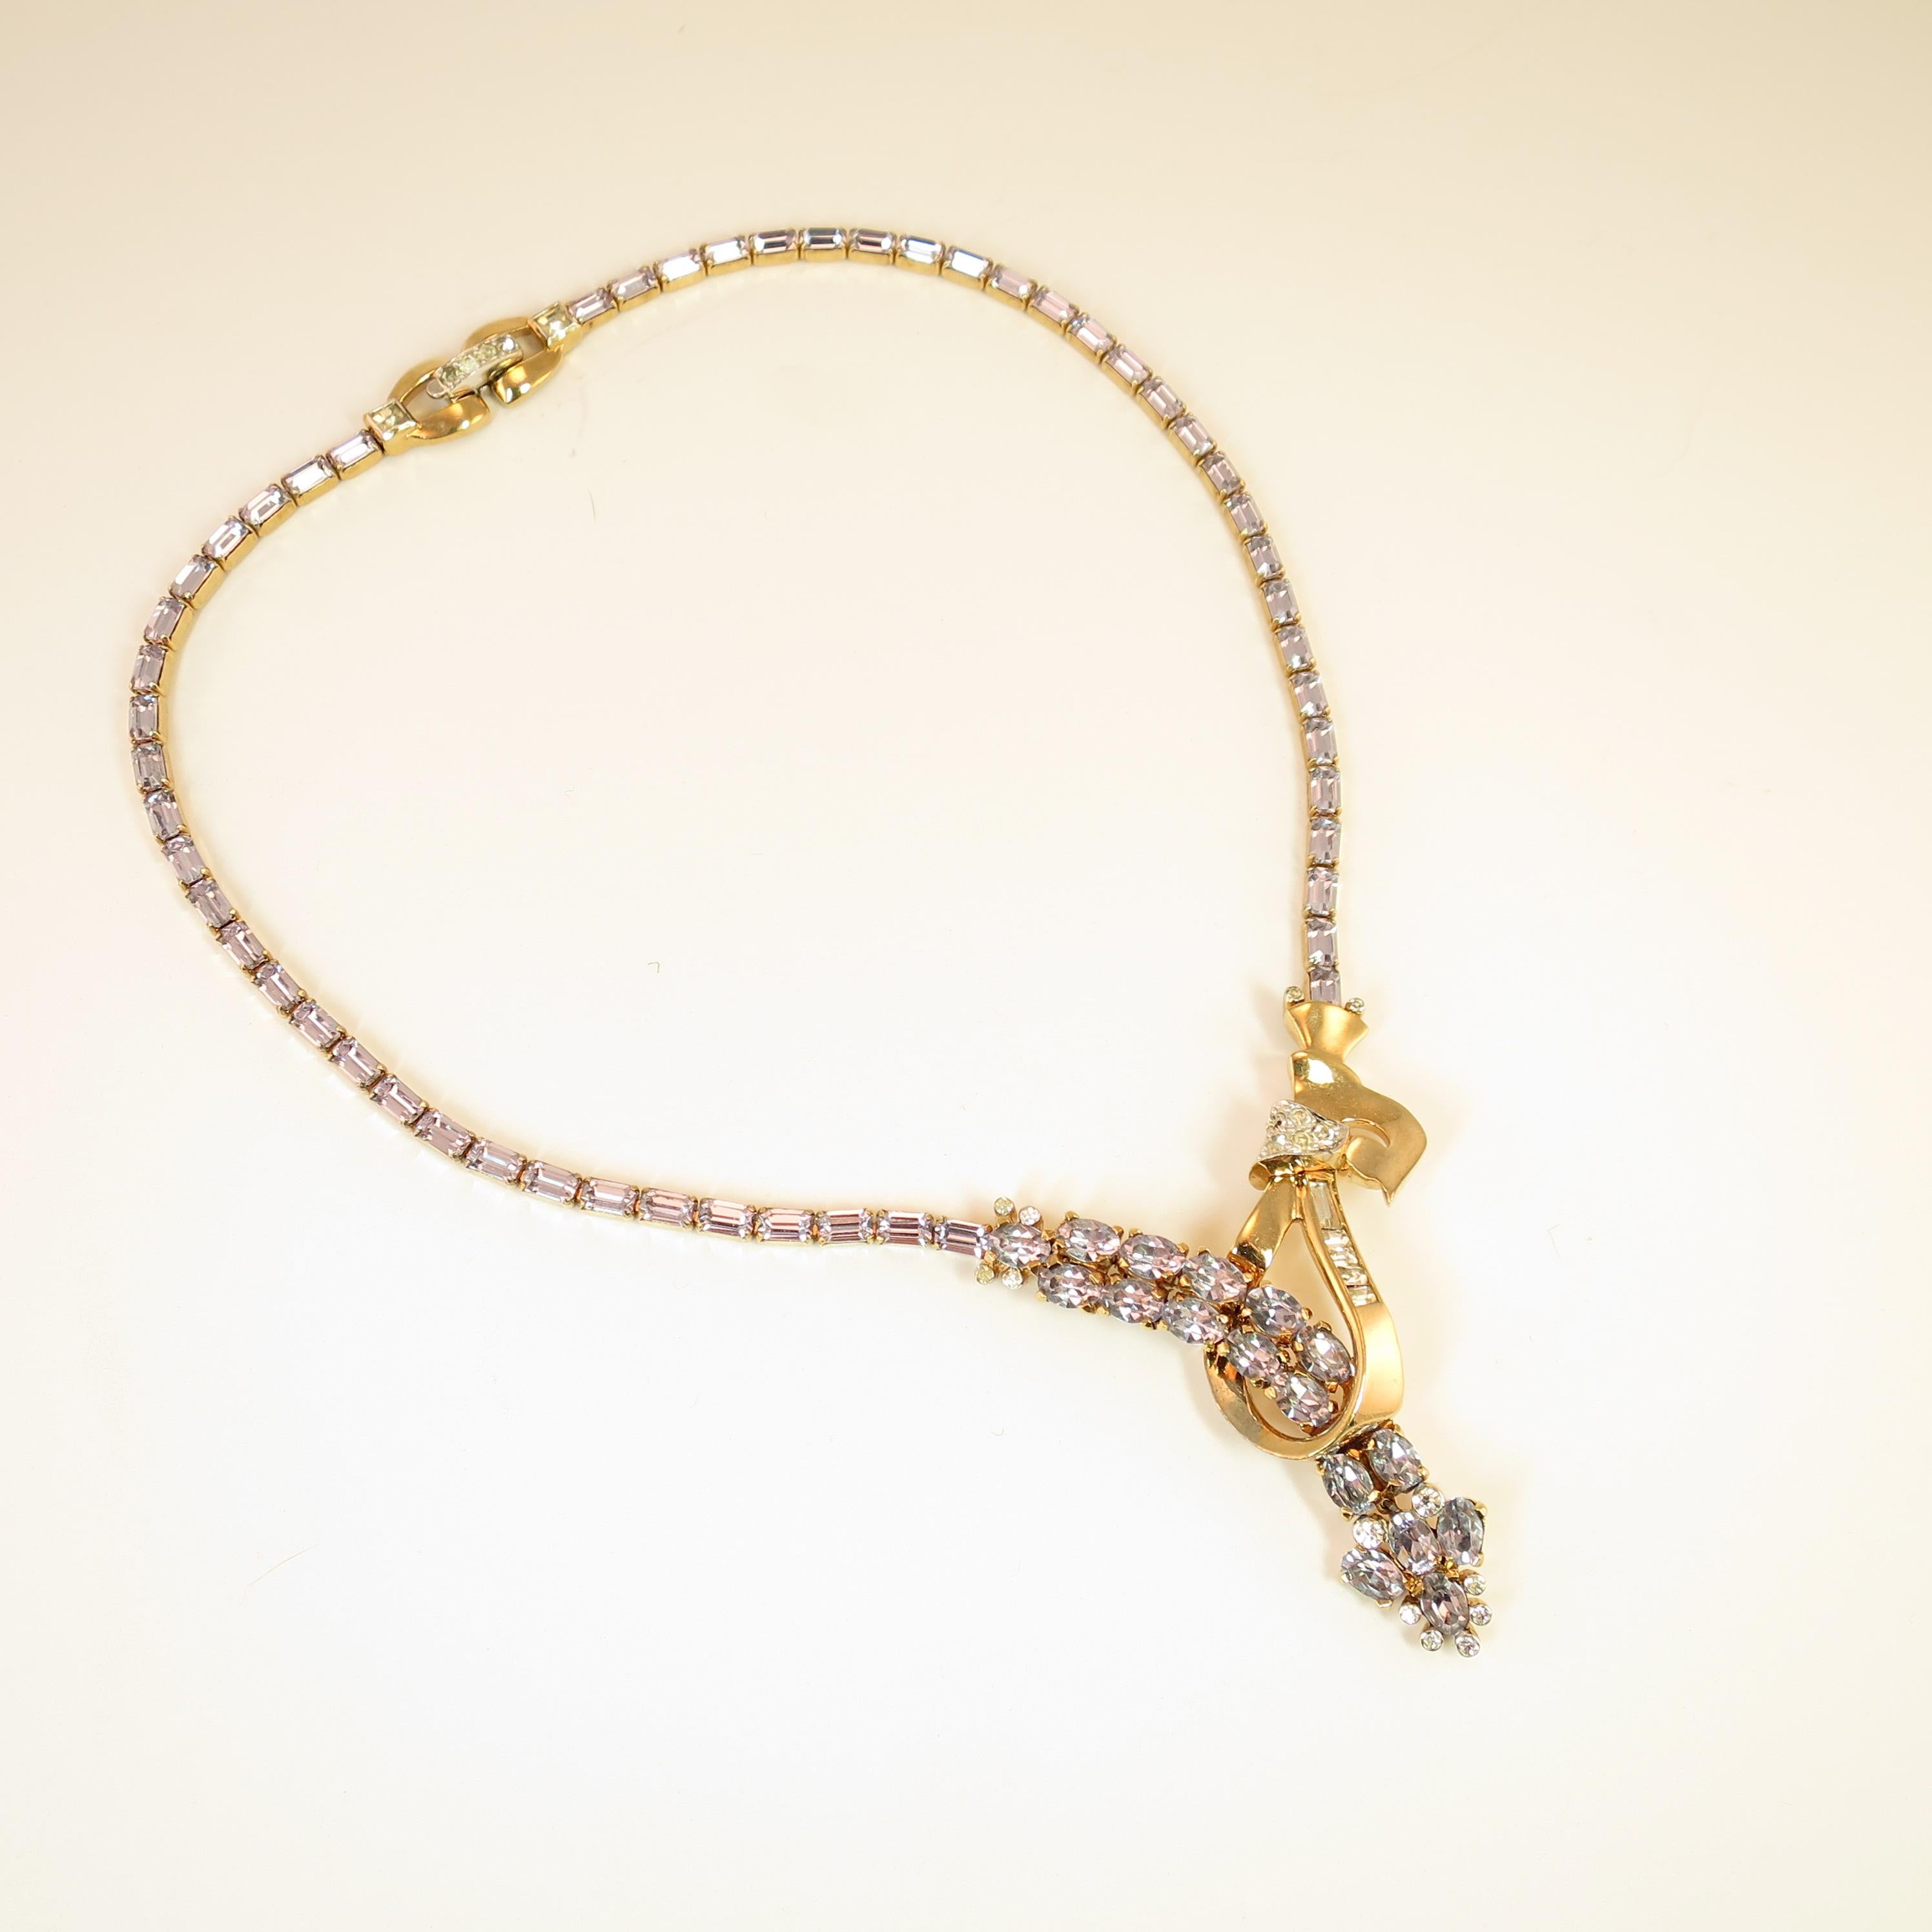 Offered here is a Mazer Bros. gold-plated rhodium necklace and matching clip-back earrings from the early 1940s. The necklace reveals an asymmetrical looped ribbon and arrow design with an articulated dangle; it features color-change alexandrite